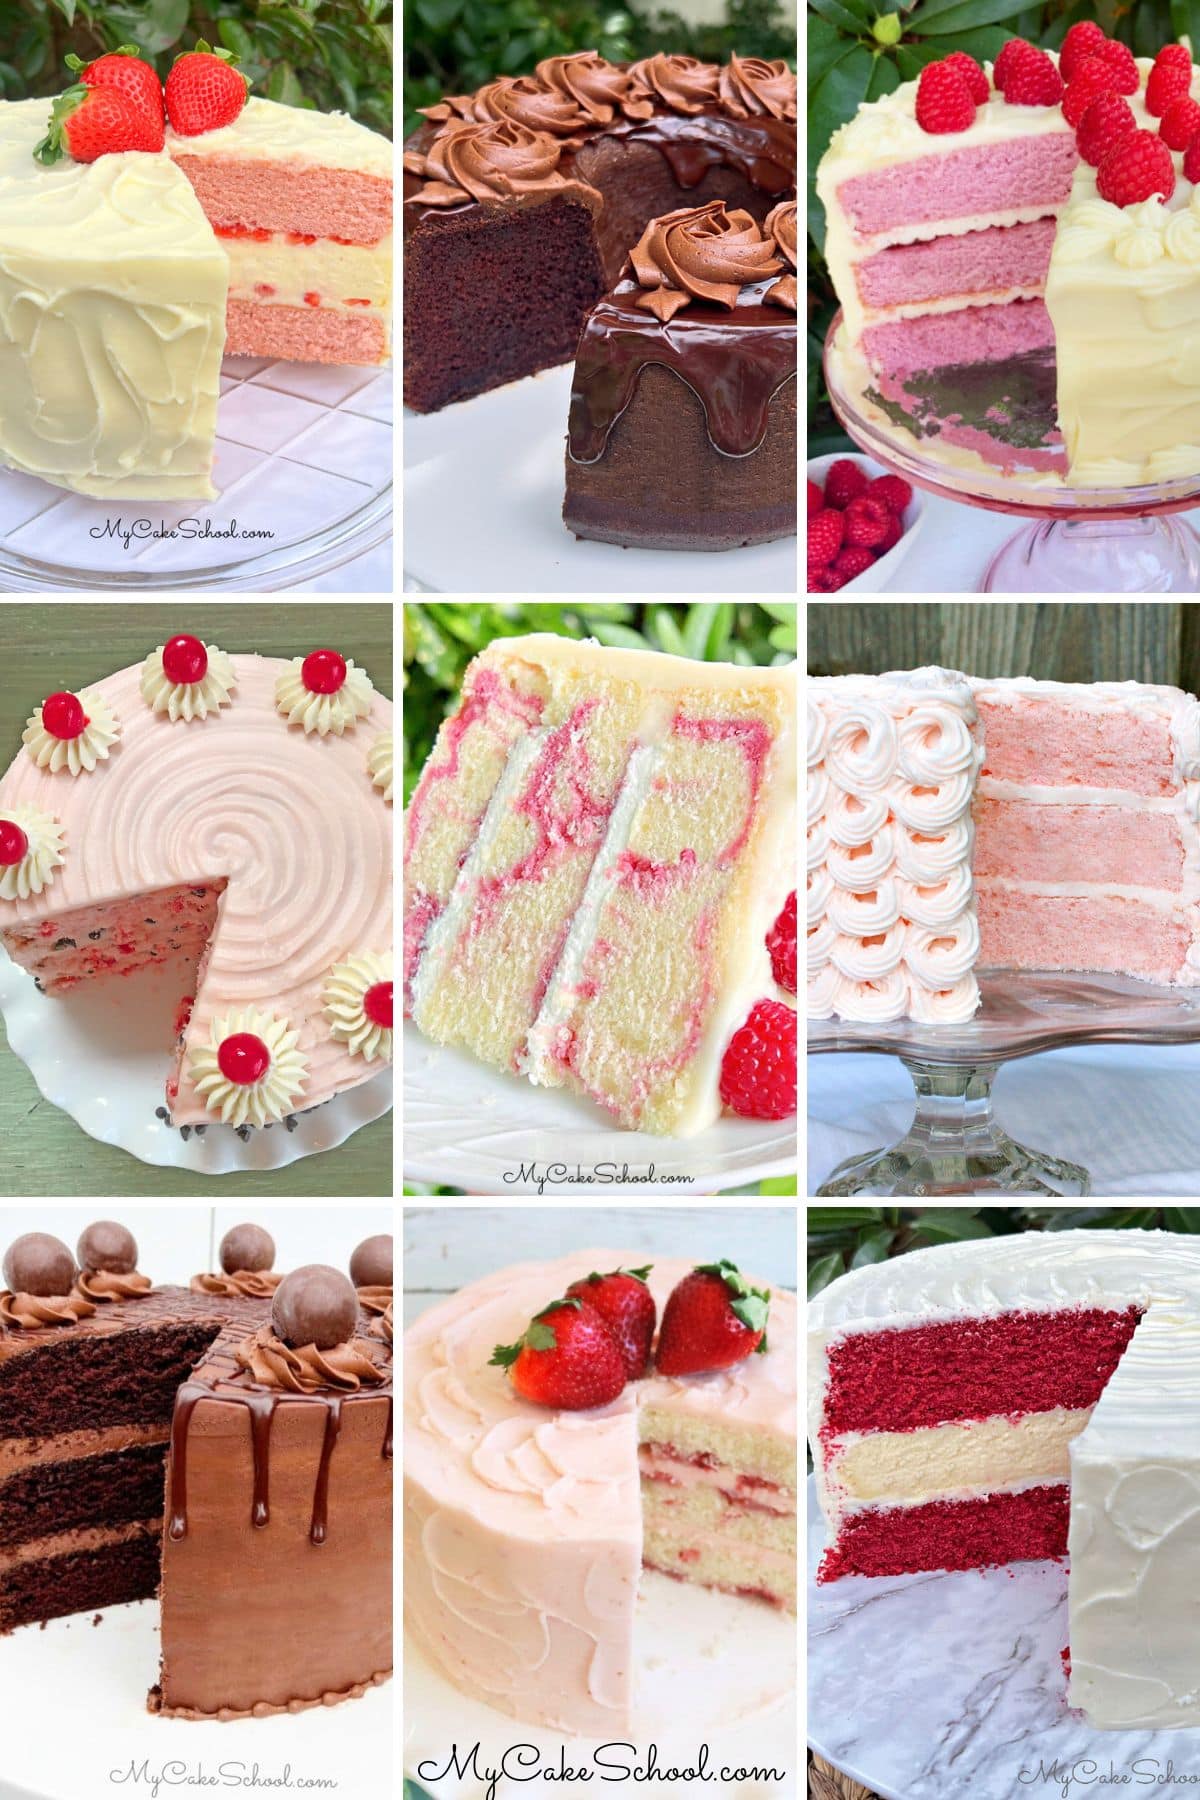 Photo grid of several Valentine's Day Cake recipes.